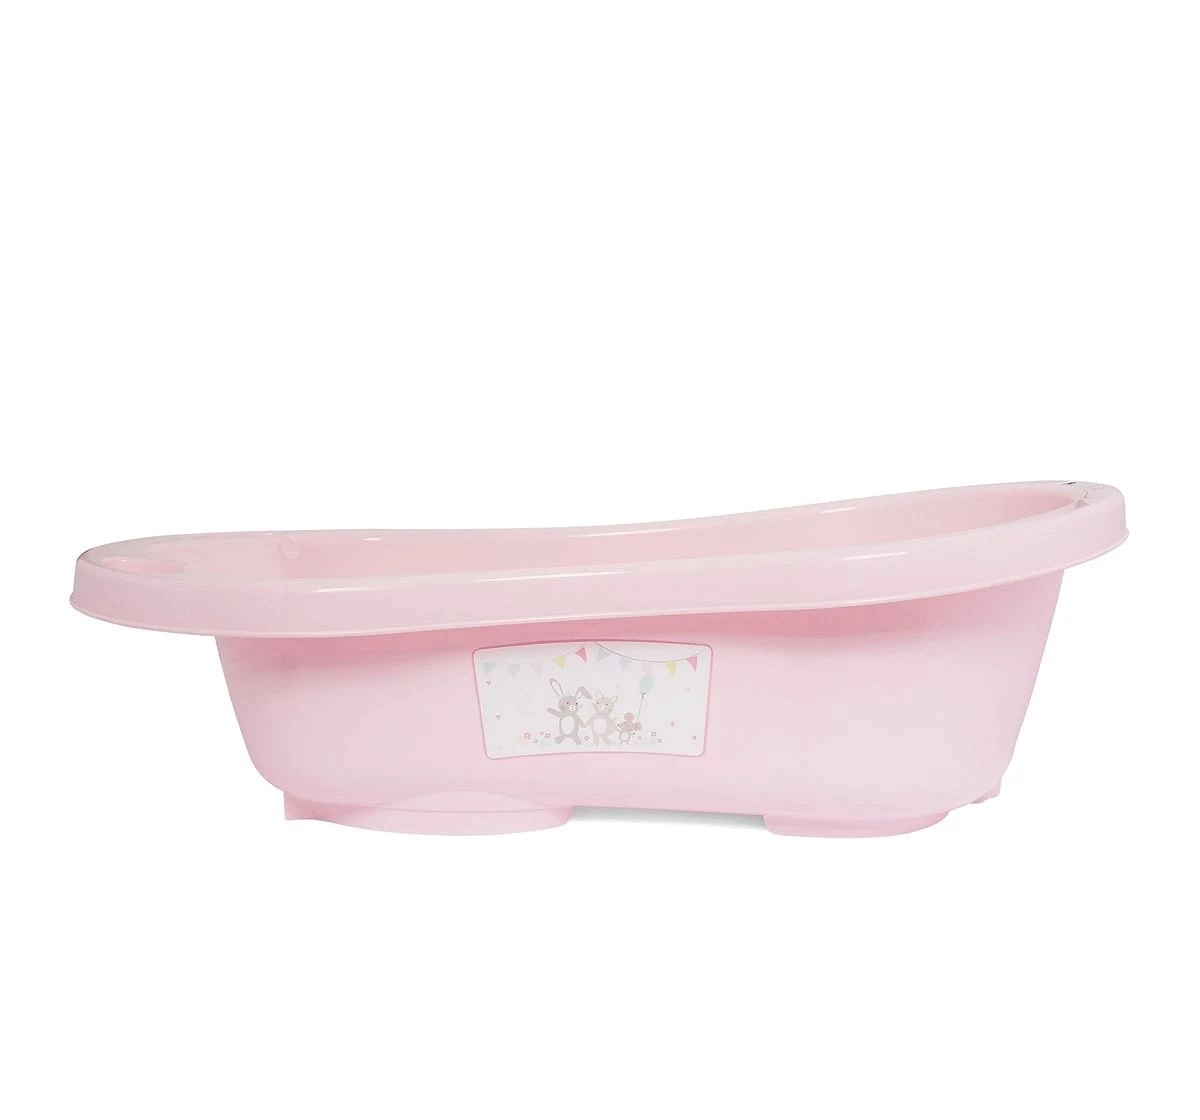 Mothercare Confetti Party Baby Bath Tub Pink